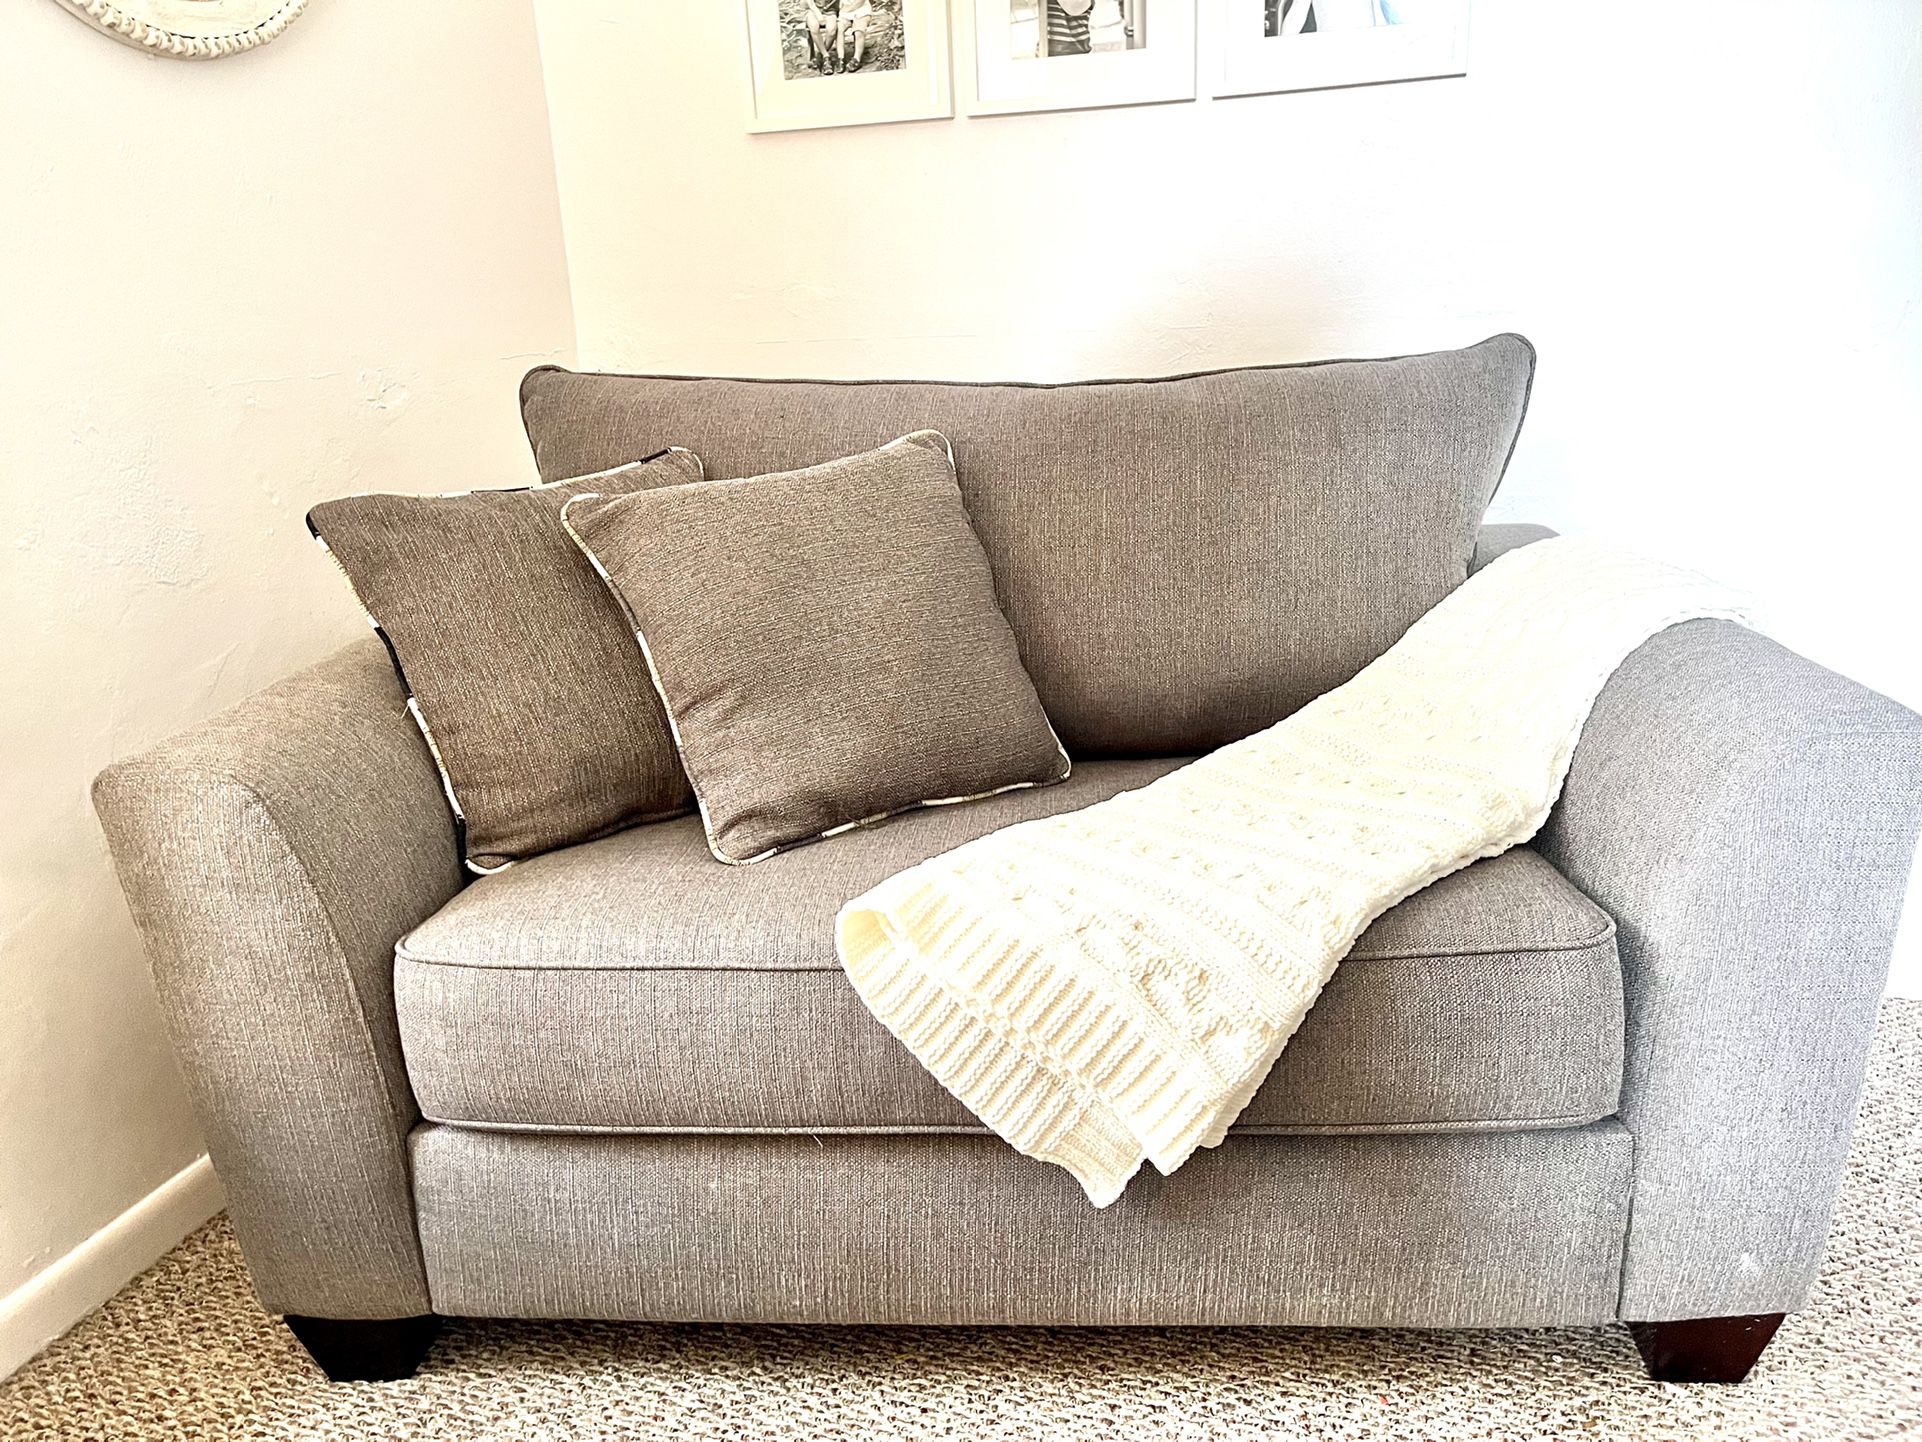 Gray Sealy Pull Out Sleeper Sofa Chair